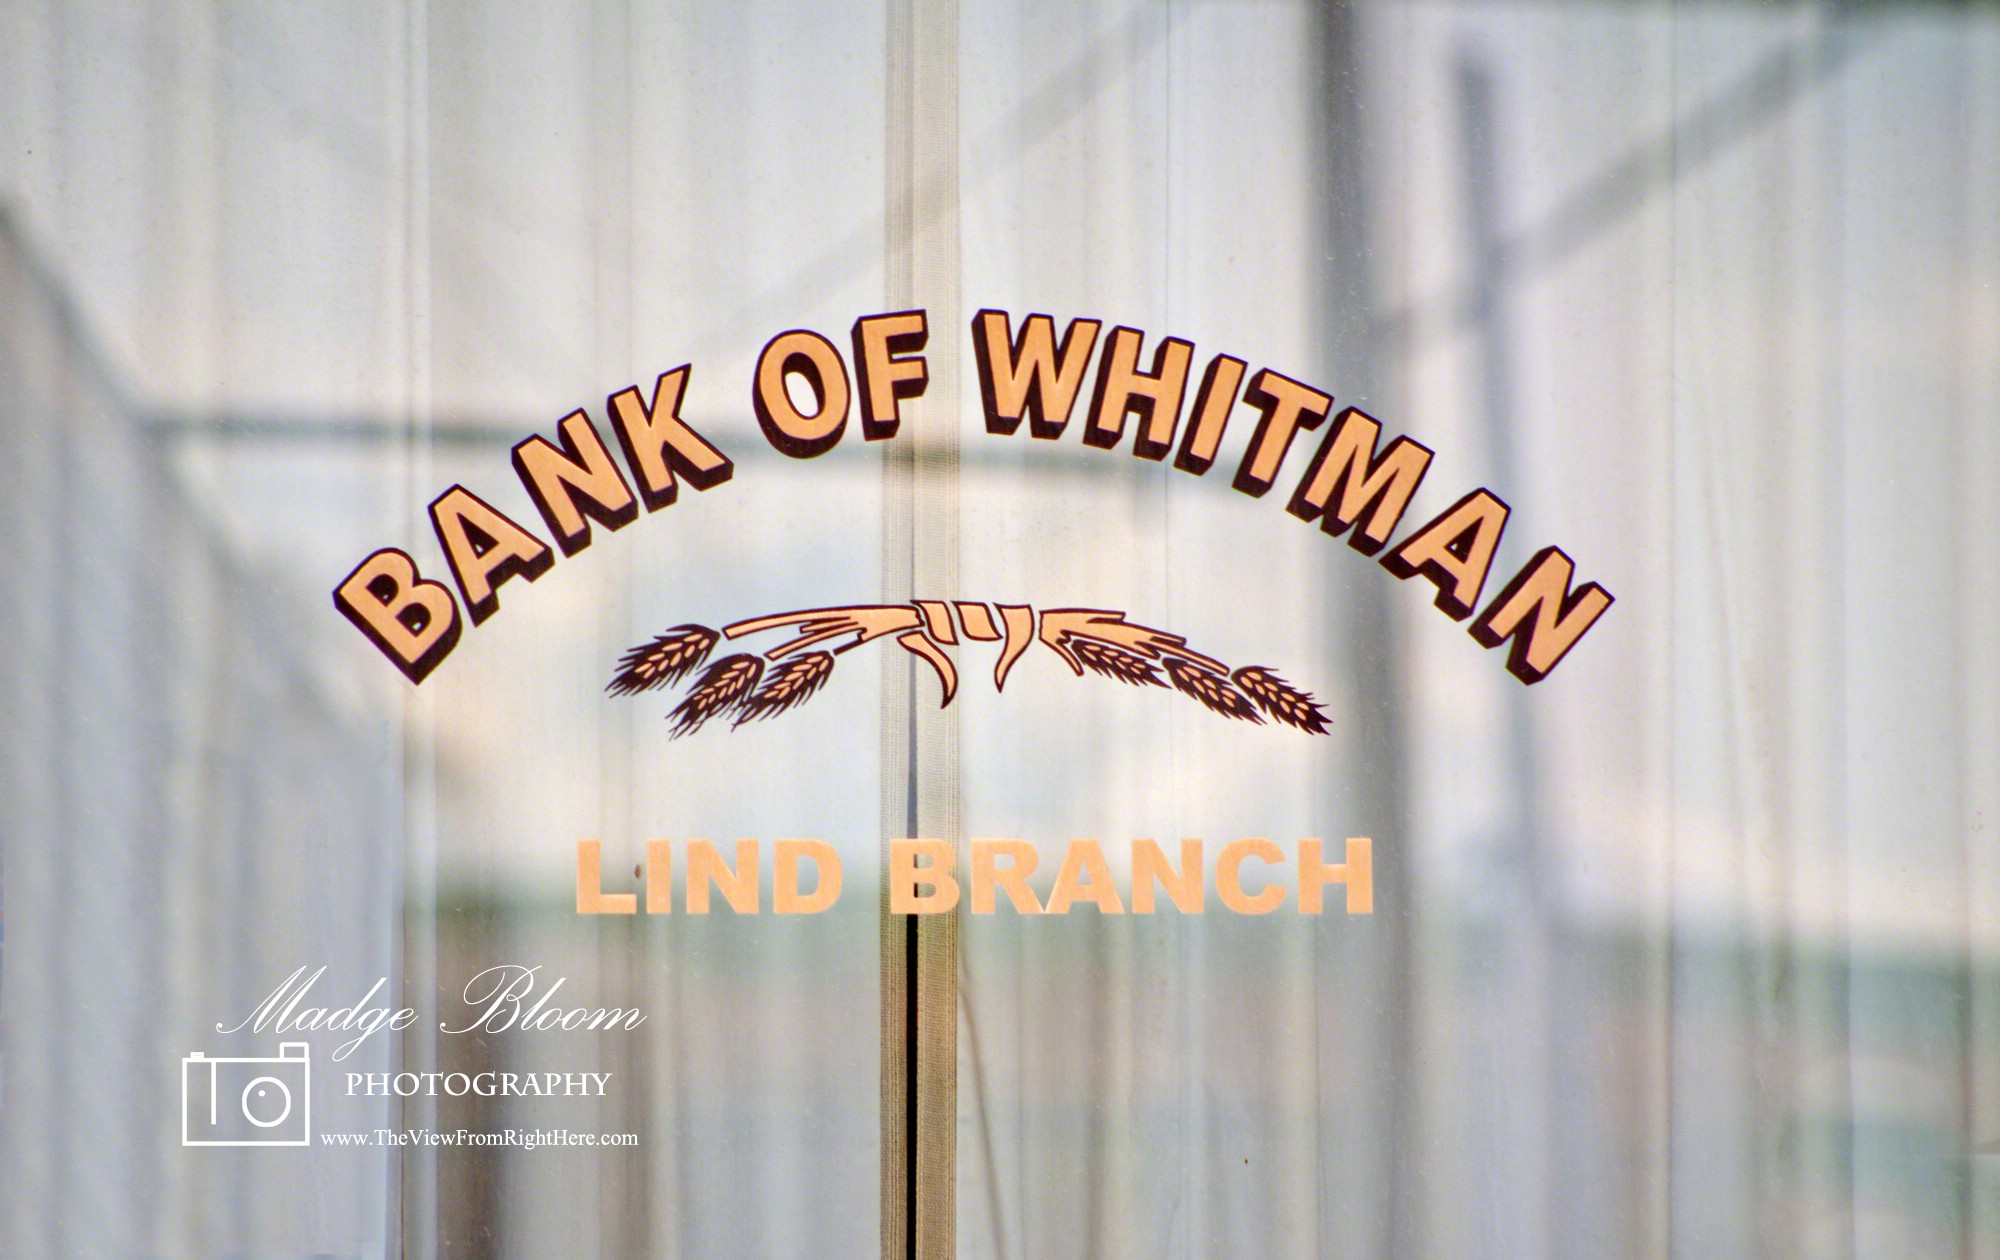 Bank of Whitman – Closed